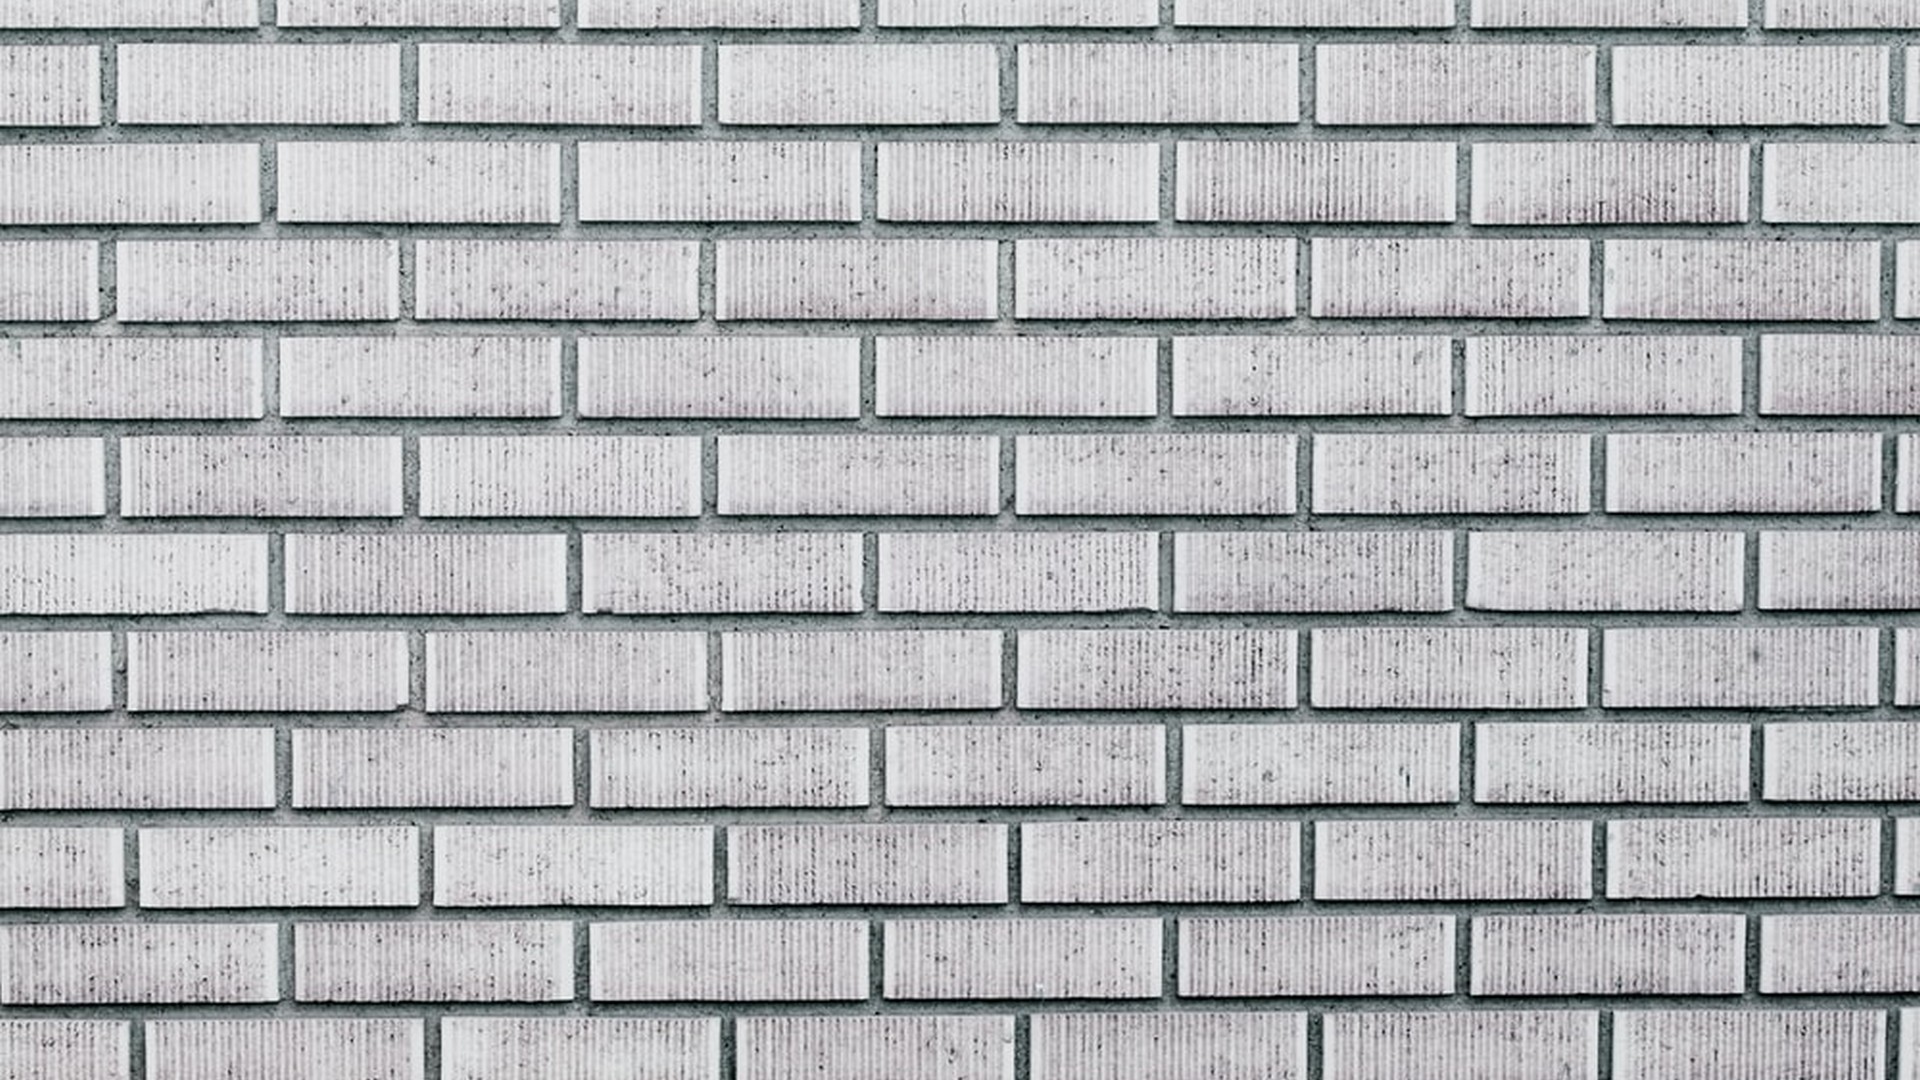 White Brick Desktop Backgrounds HD With high-resolution 1920X1080 pixel. You can use this wallpaper for your Windows and Mac OS computers as well as your Android and iPhone smartphones